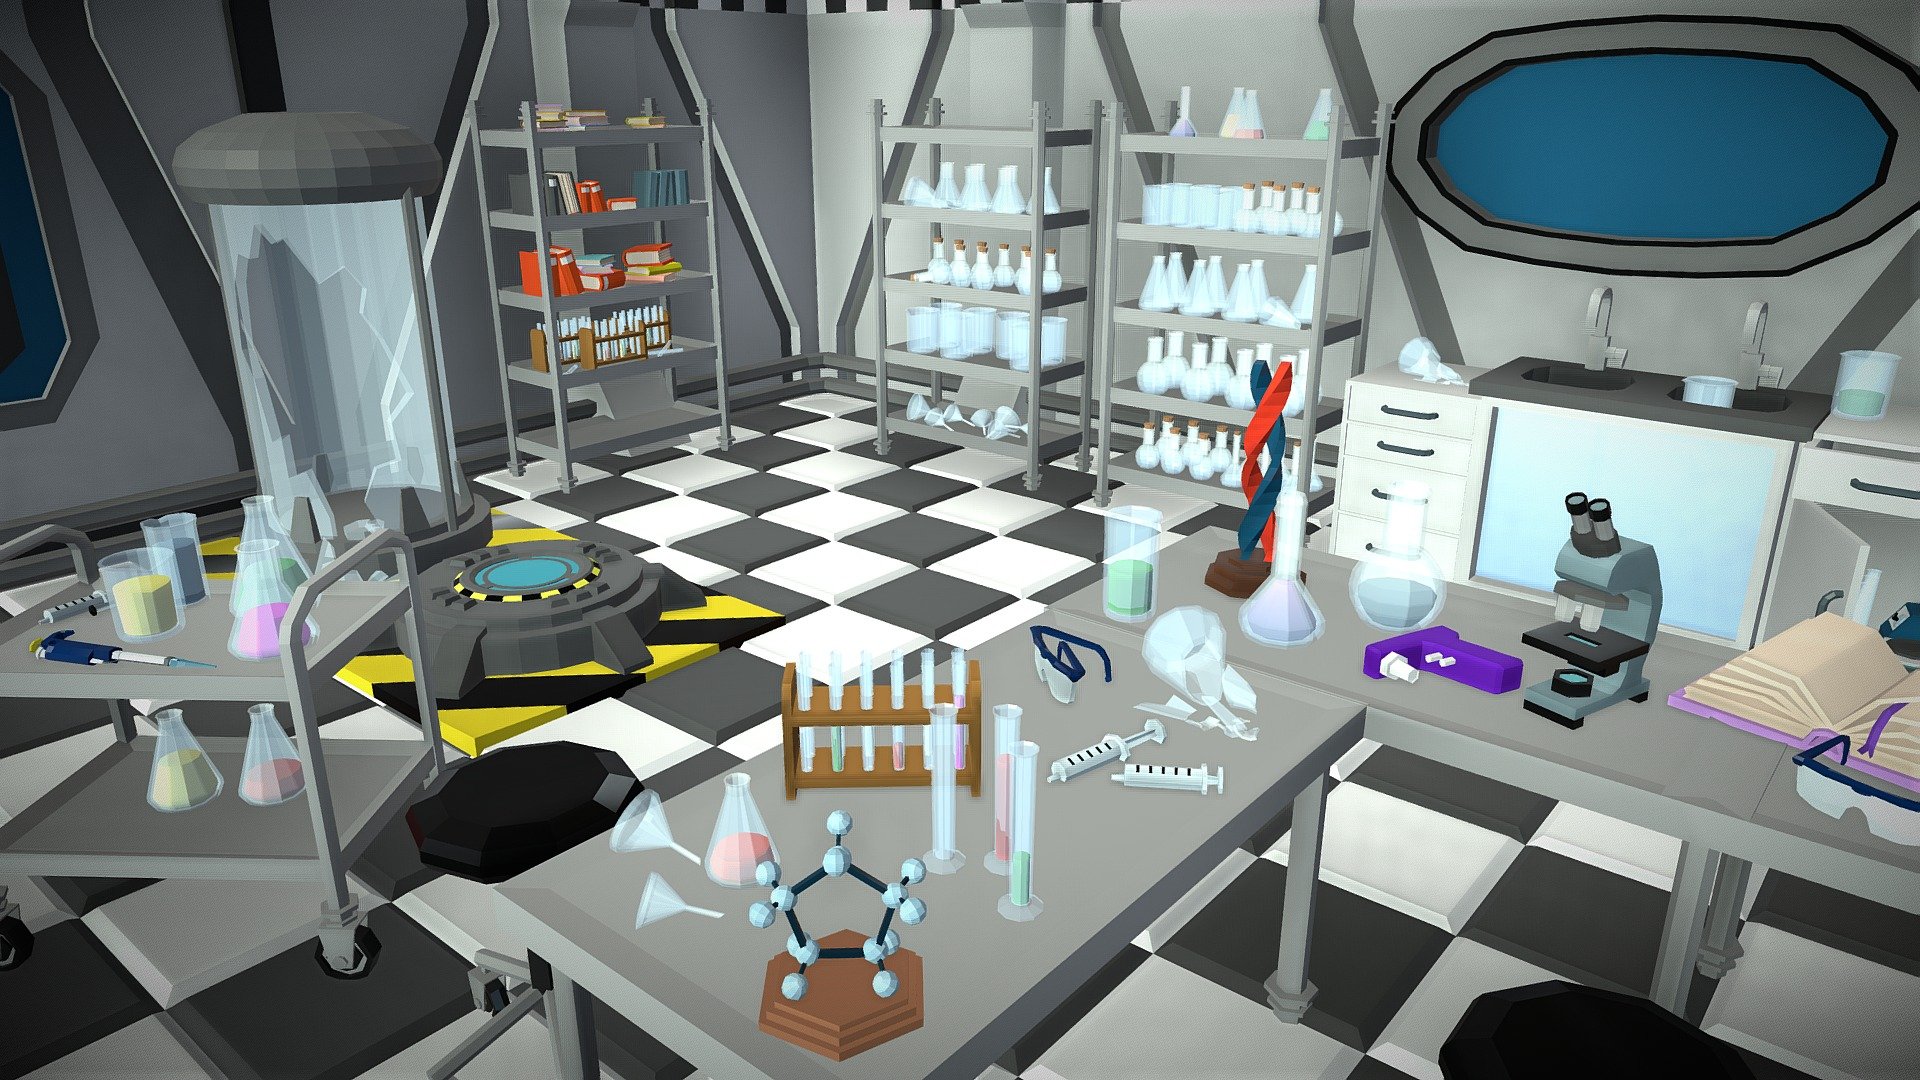 All models &amp; demo scenes are part of the Ultimate Low Poly Nature Pack.

A Low Poly Laboratory with 184 unique assets to build your own versatile laboratory!

All models are displayed in a list scene &amp; in 2 different demo scenes.

–Texture–

All objects share the same 256x256 texture to increase performance

–Package Content–




Floors (5x) – Tiles, Danger Zone

Lab Walls (32x) – old, Sci-Fi

Books &amp; Shelves (40x) 

Tables, Shelves, Carts, Cabinets, Stool (10x)

Kettle, Oven, Lamp (3x)

Teleporter, Capsules (6x)

Lab glassware (47x) – Tubes, Beaker, Erlenmeyer Flasks, Flasks, Funnels

Electronic Labware (6x) – Microscope, Scale, Shaker, Bunsen Burner, etc

Lab Props (12x) – Pipette, Pipette Stand, Goggles, Tripod, Syringes
-Statues (2x) – DNA, Molecule

Papyrus Scrolls, Feathers, Inkbottle (9x)

Candles, Candle Stand (6x) 

Scales Old (2x)

Dynamite (4x)

Feedback: purepoly.info@gmail.com

Link to full package:

Ultimate Low Poly Nature Pack - Low Poly Laboratory - 3D model by purepoly 3d model